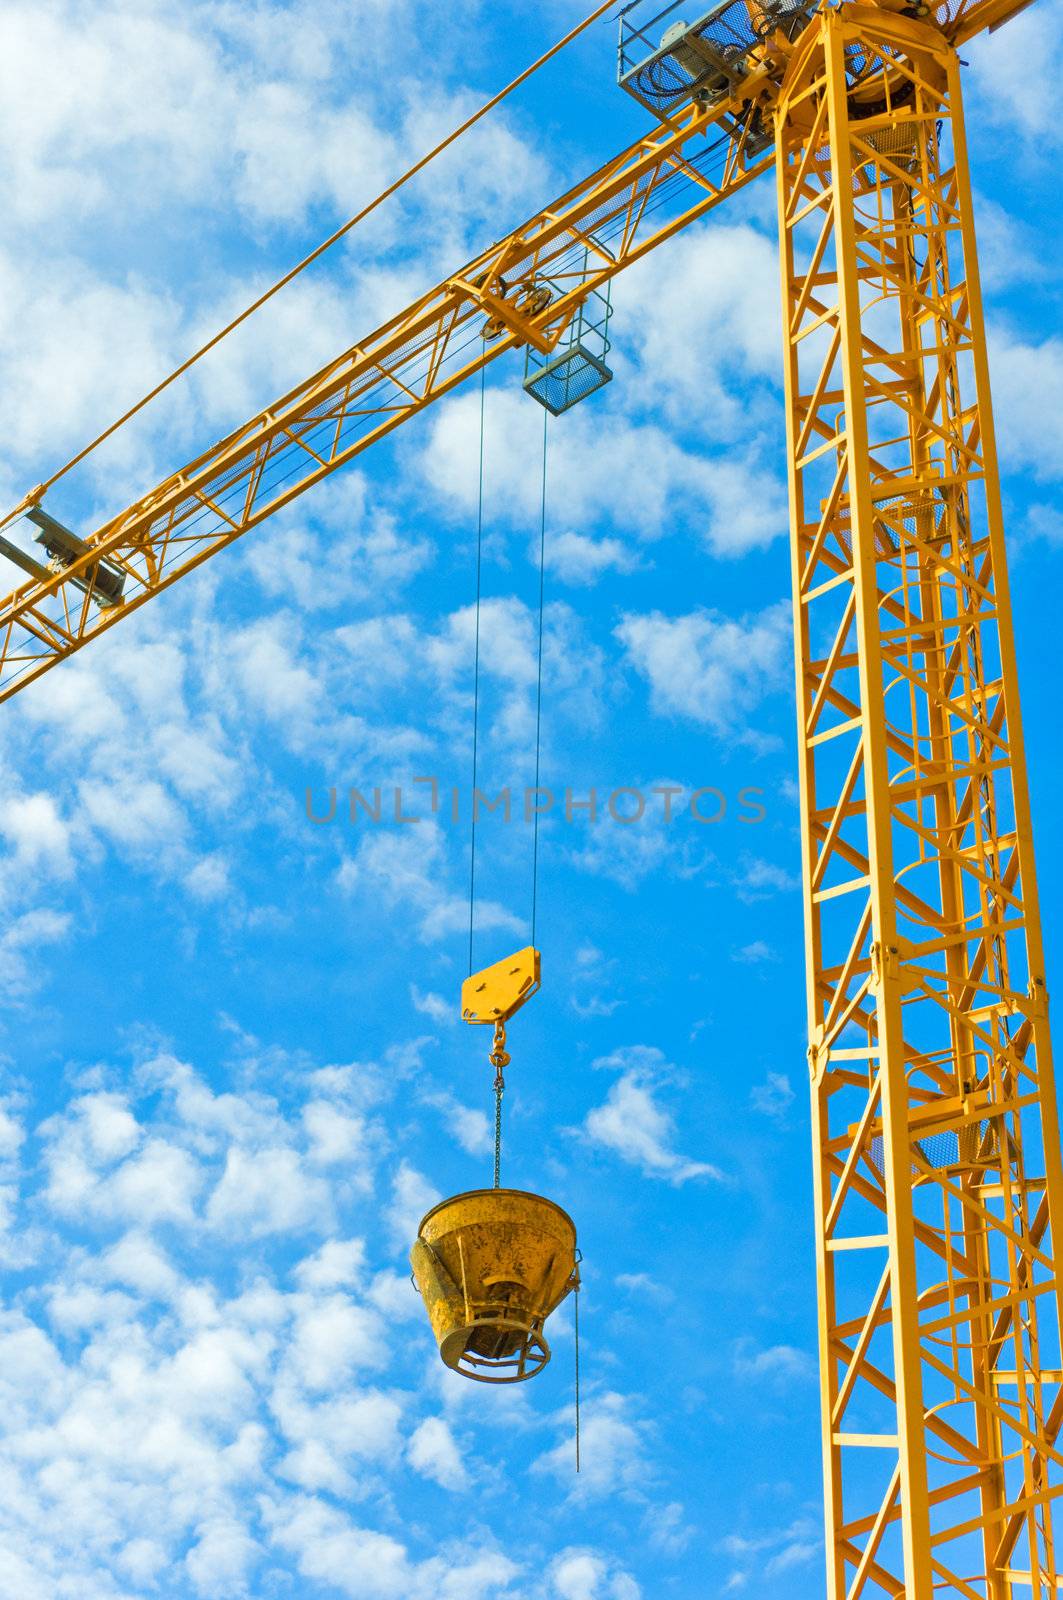 Yellow crane against blue sky with fluffy clouds.